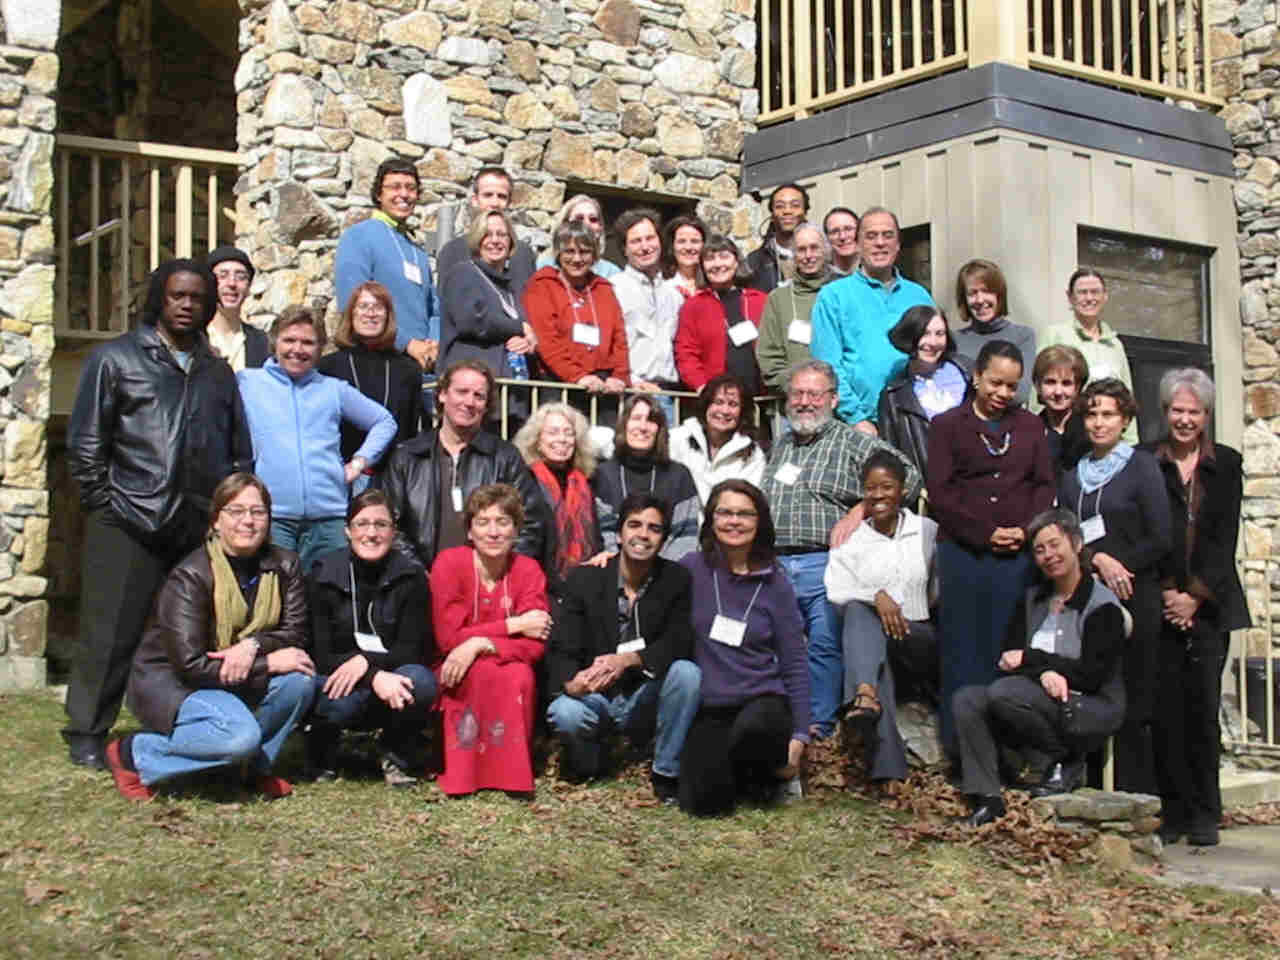 A group shot from one of our earliest Professional Development Workshops in 2004